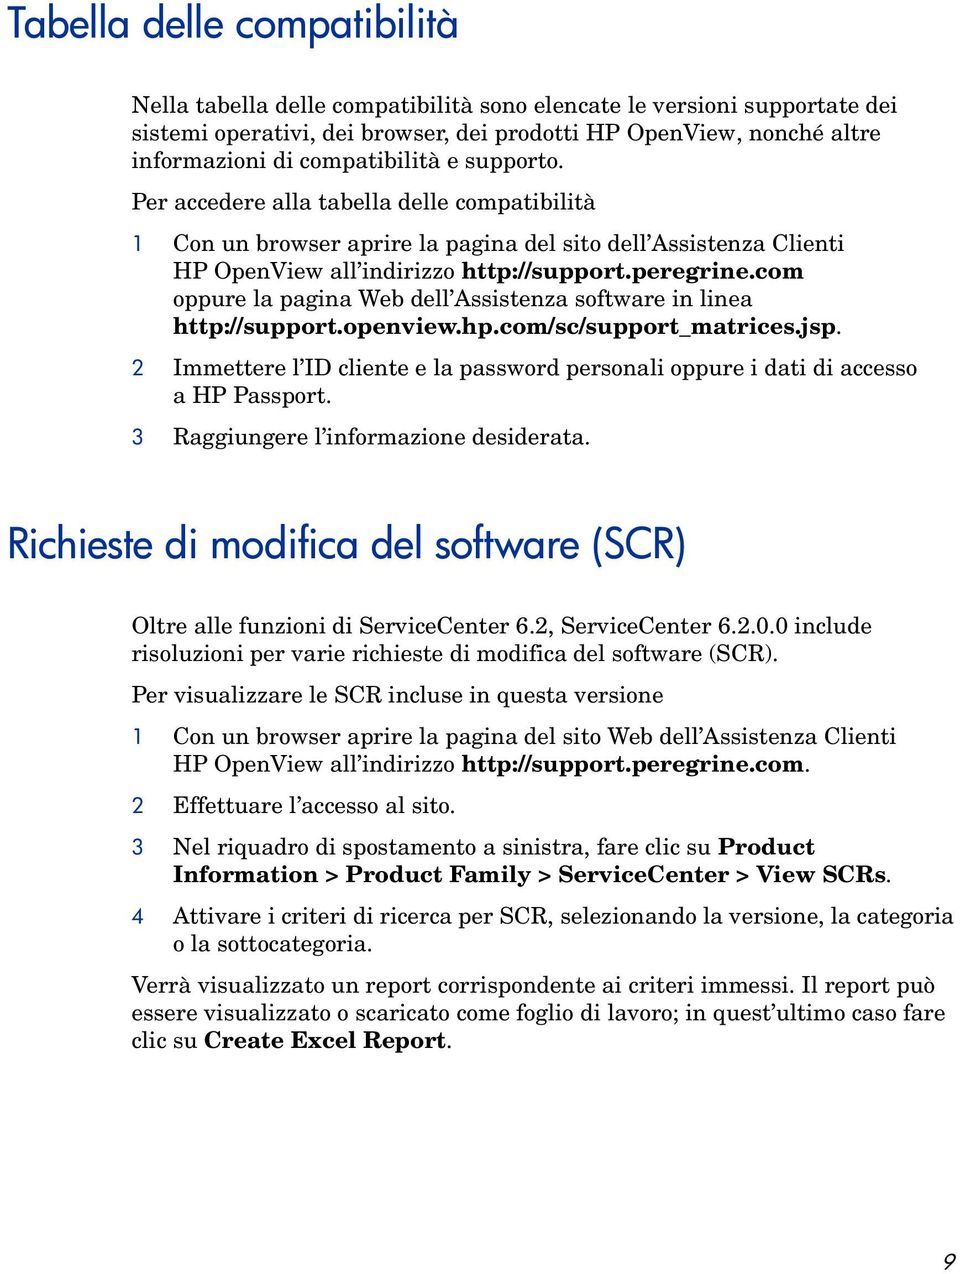 com oppure la pagina Web dell Assistenza software in linea http://support.openview.hp.com/sc/support_matrices.jsp.